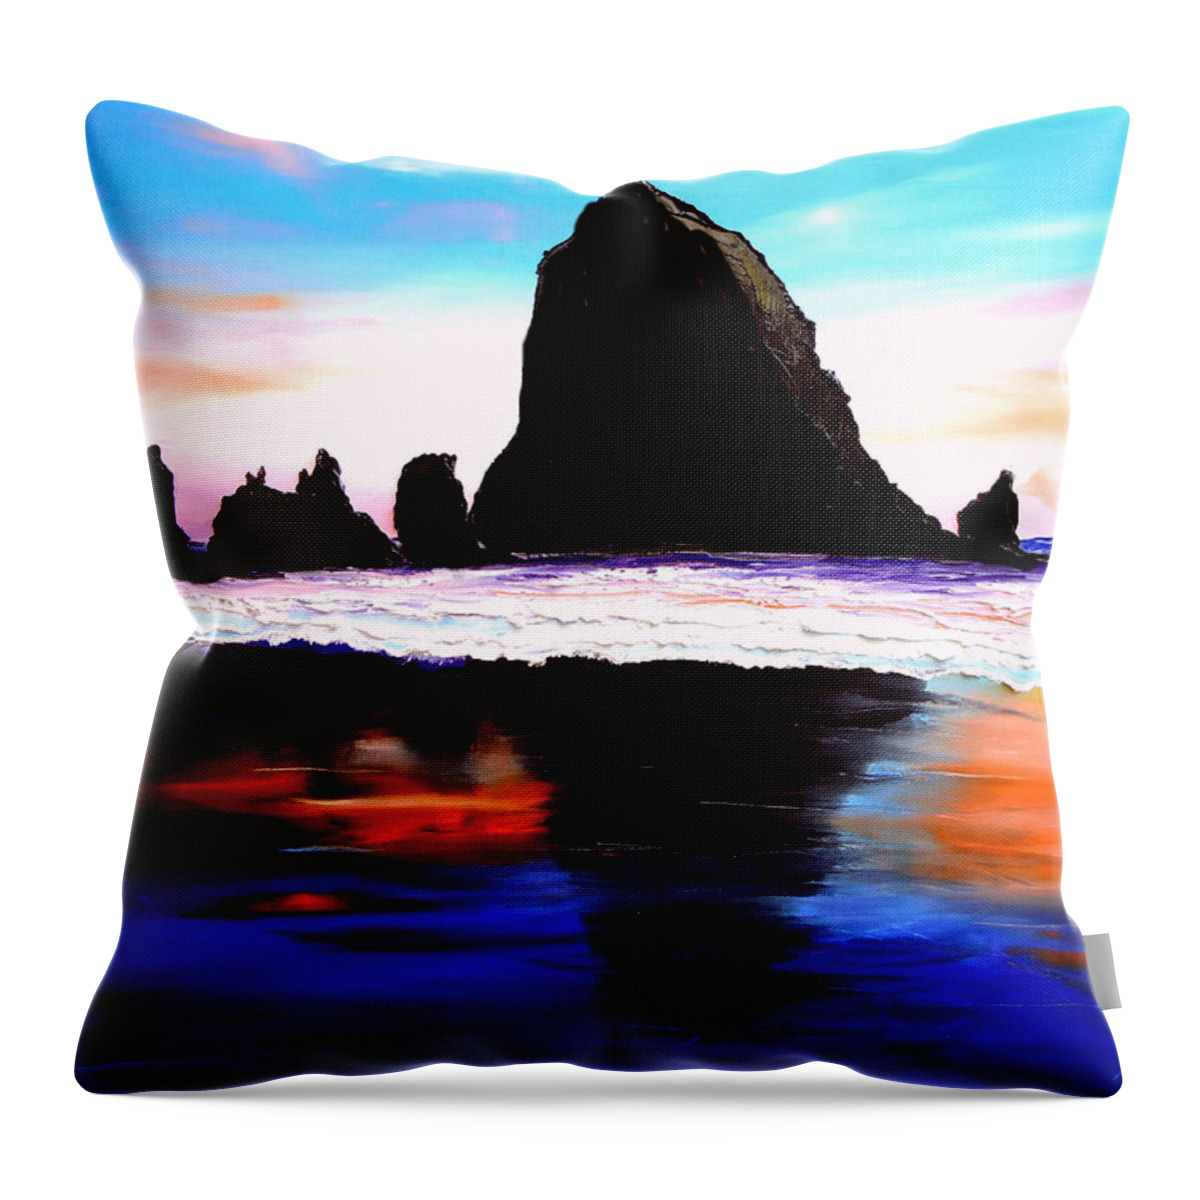  Throw Pillow featuring the painting Cannon Beach Hay Stack Rocks #23 by James Dunbar